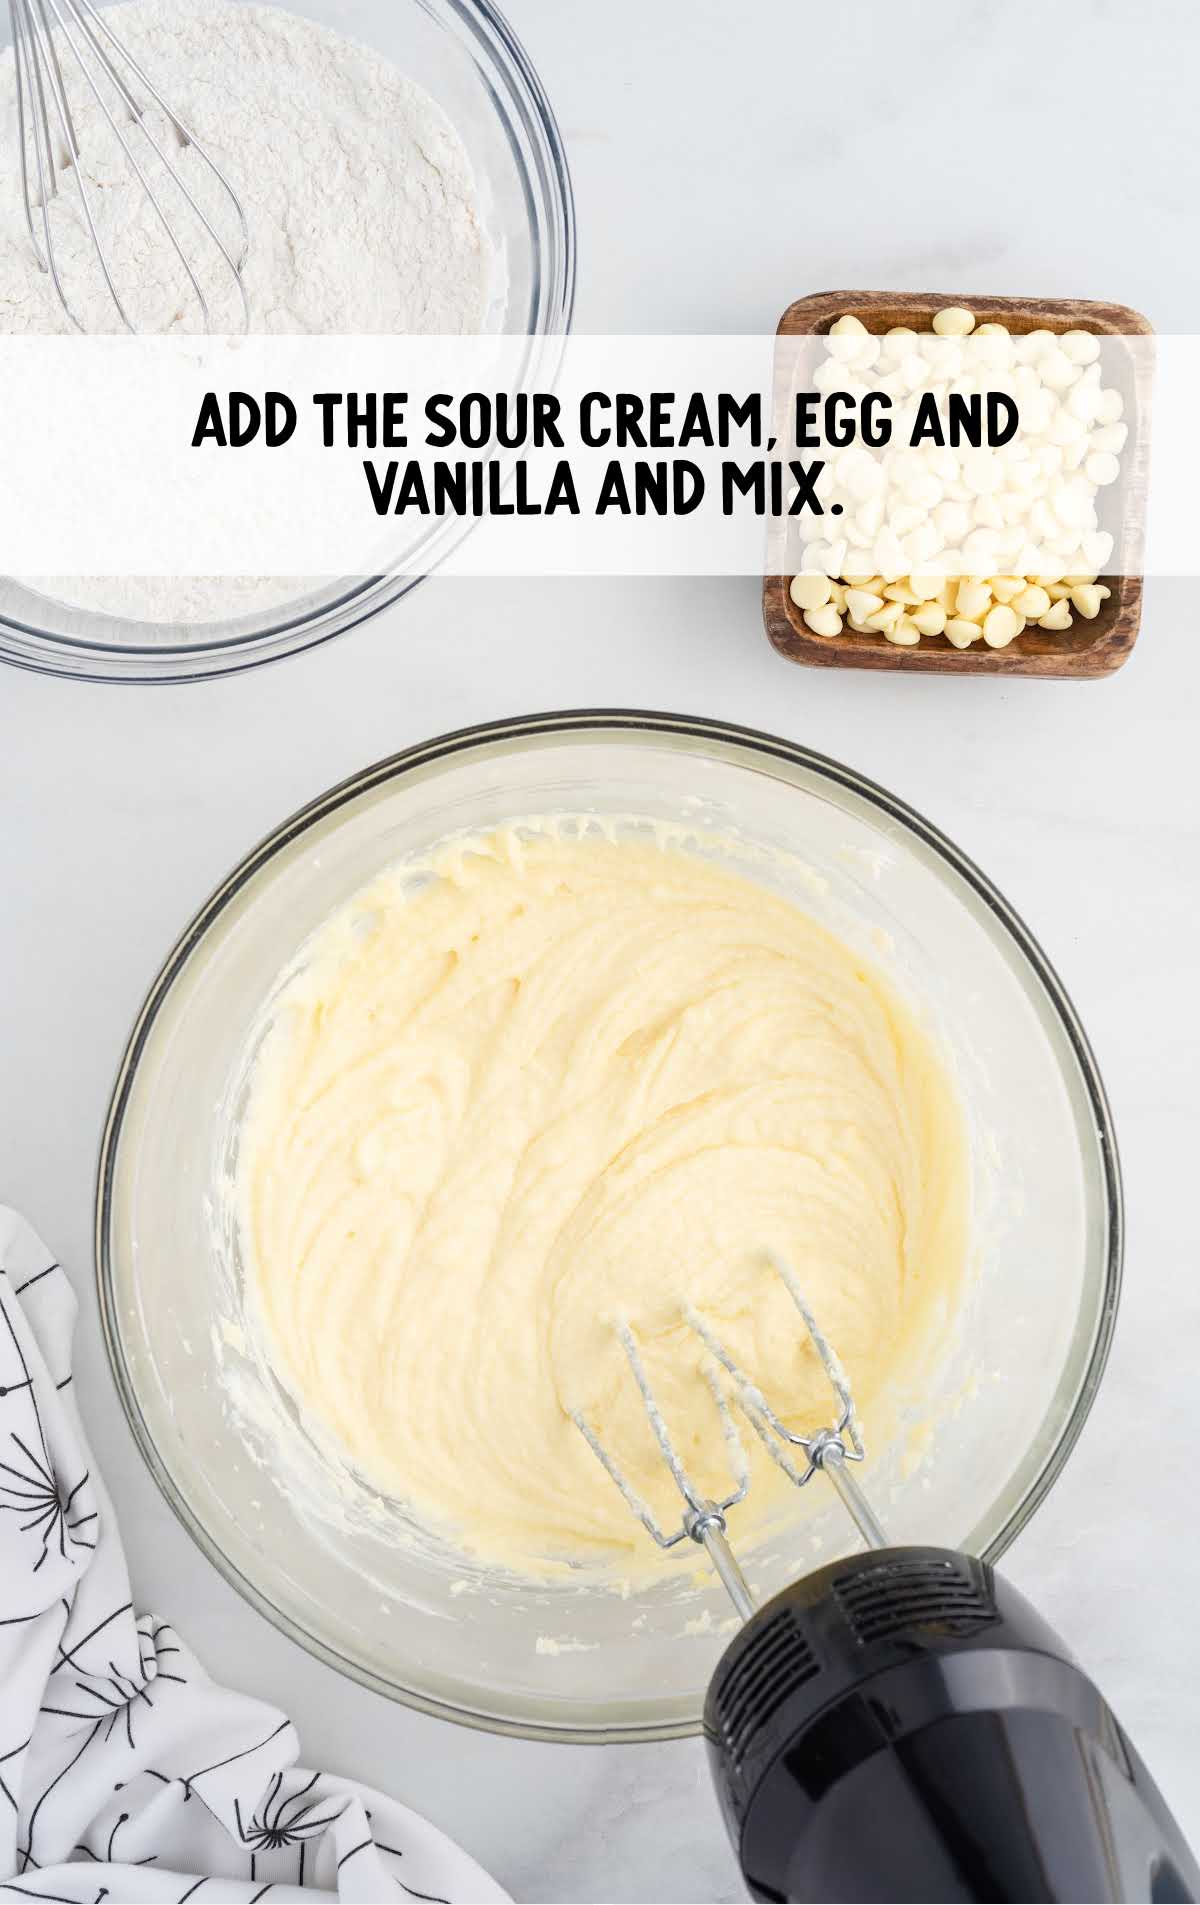 sour cream, egg and vanilla mixed with the butter mixture and blended together in a bowl